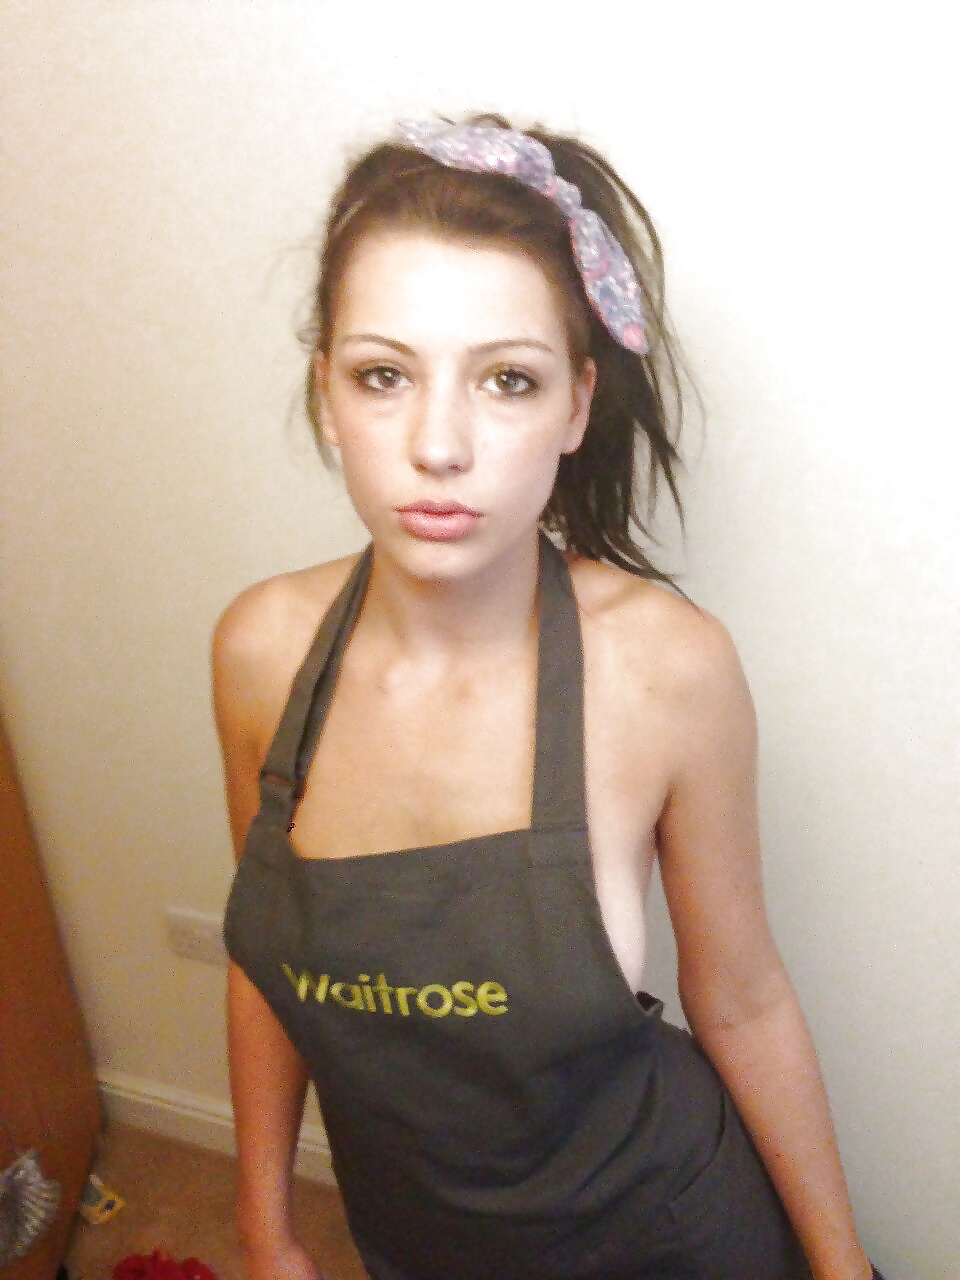 Sexy Waitrose Employee - Hungry For Cock #29021742